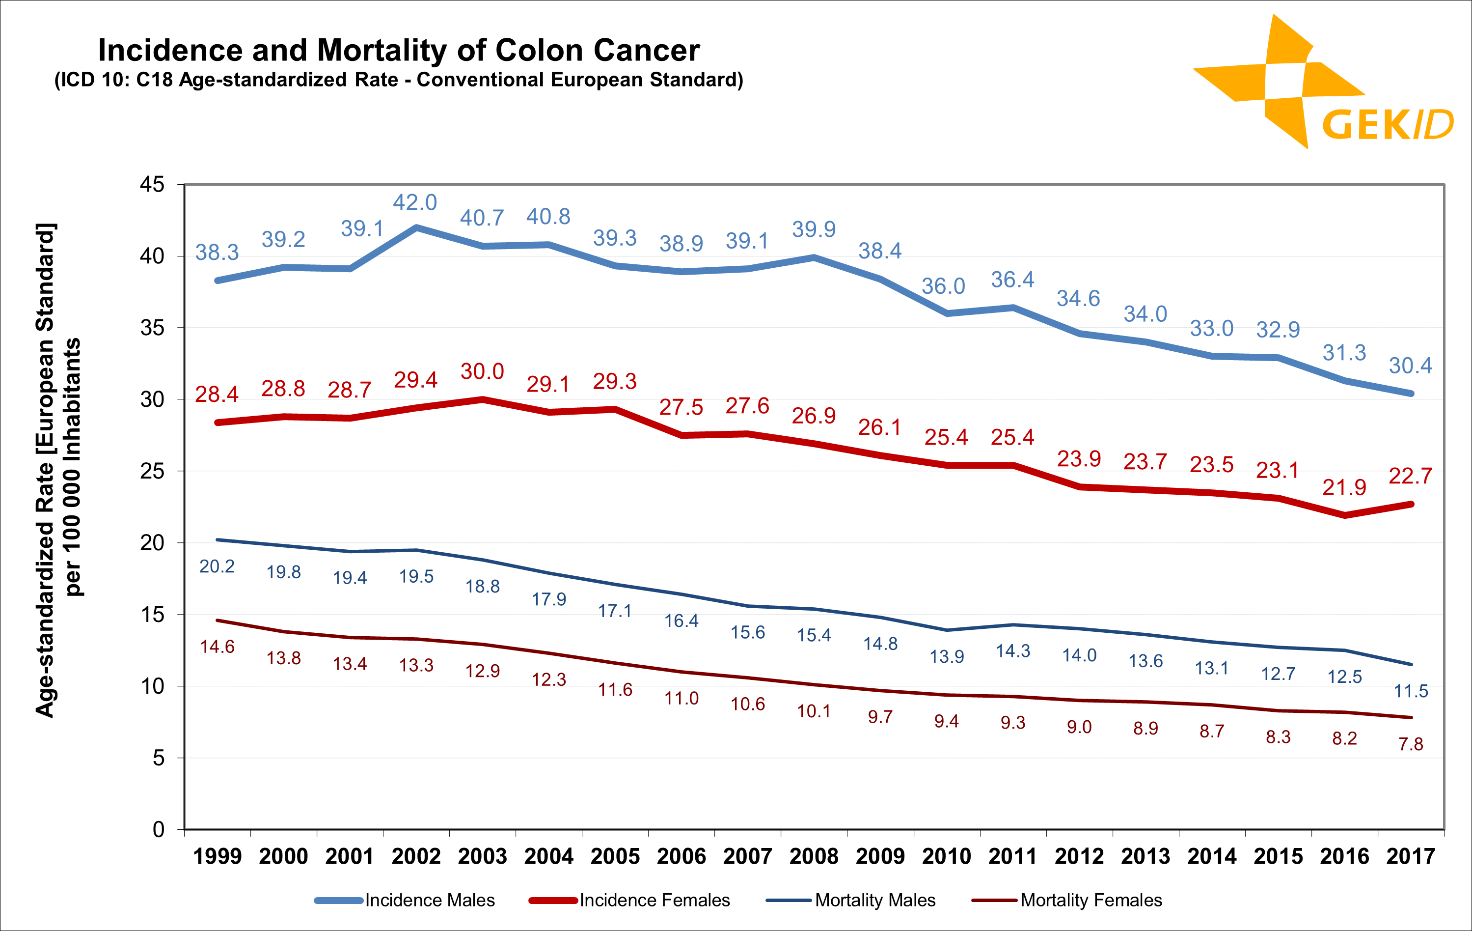 Estimated incidence and mortality of malignant neoplasms of the colon (ICD 10: C18) in Germany - age-standardized rates (old European standard).